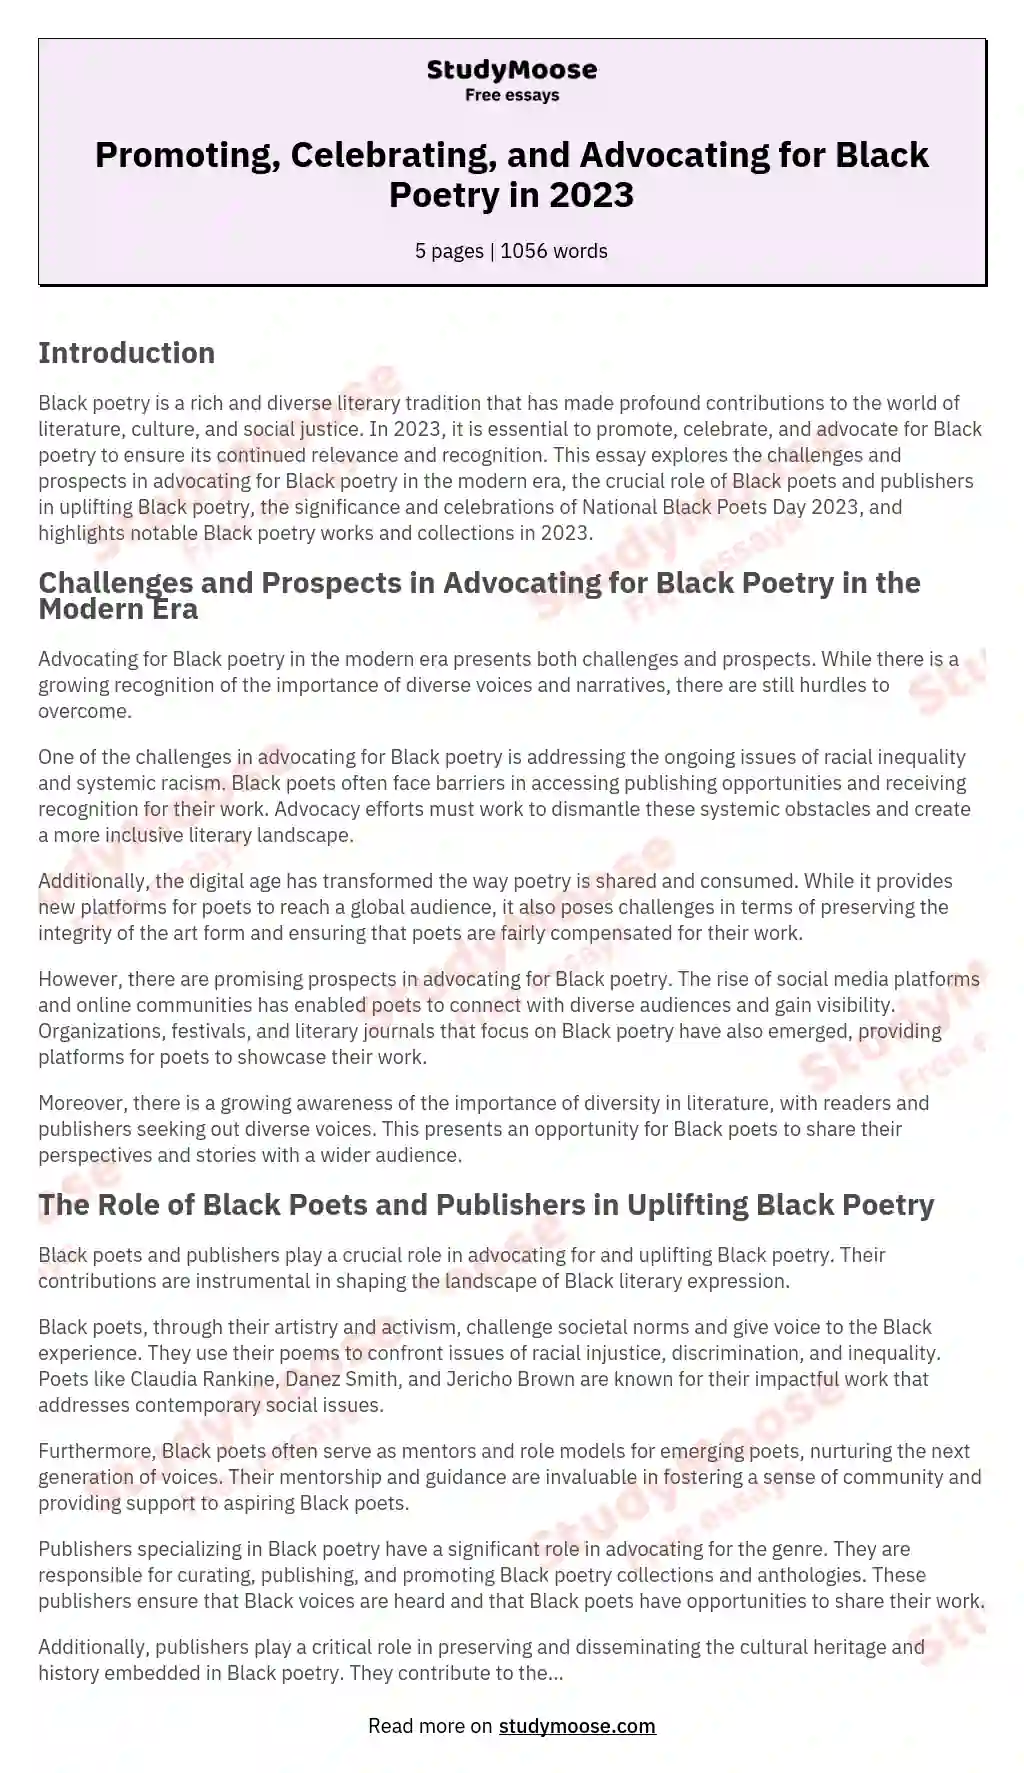 Promoting, Celebrating, and Advocating for Black Poetry in 2023 essay